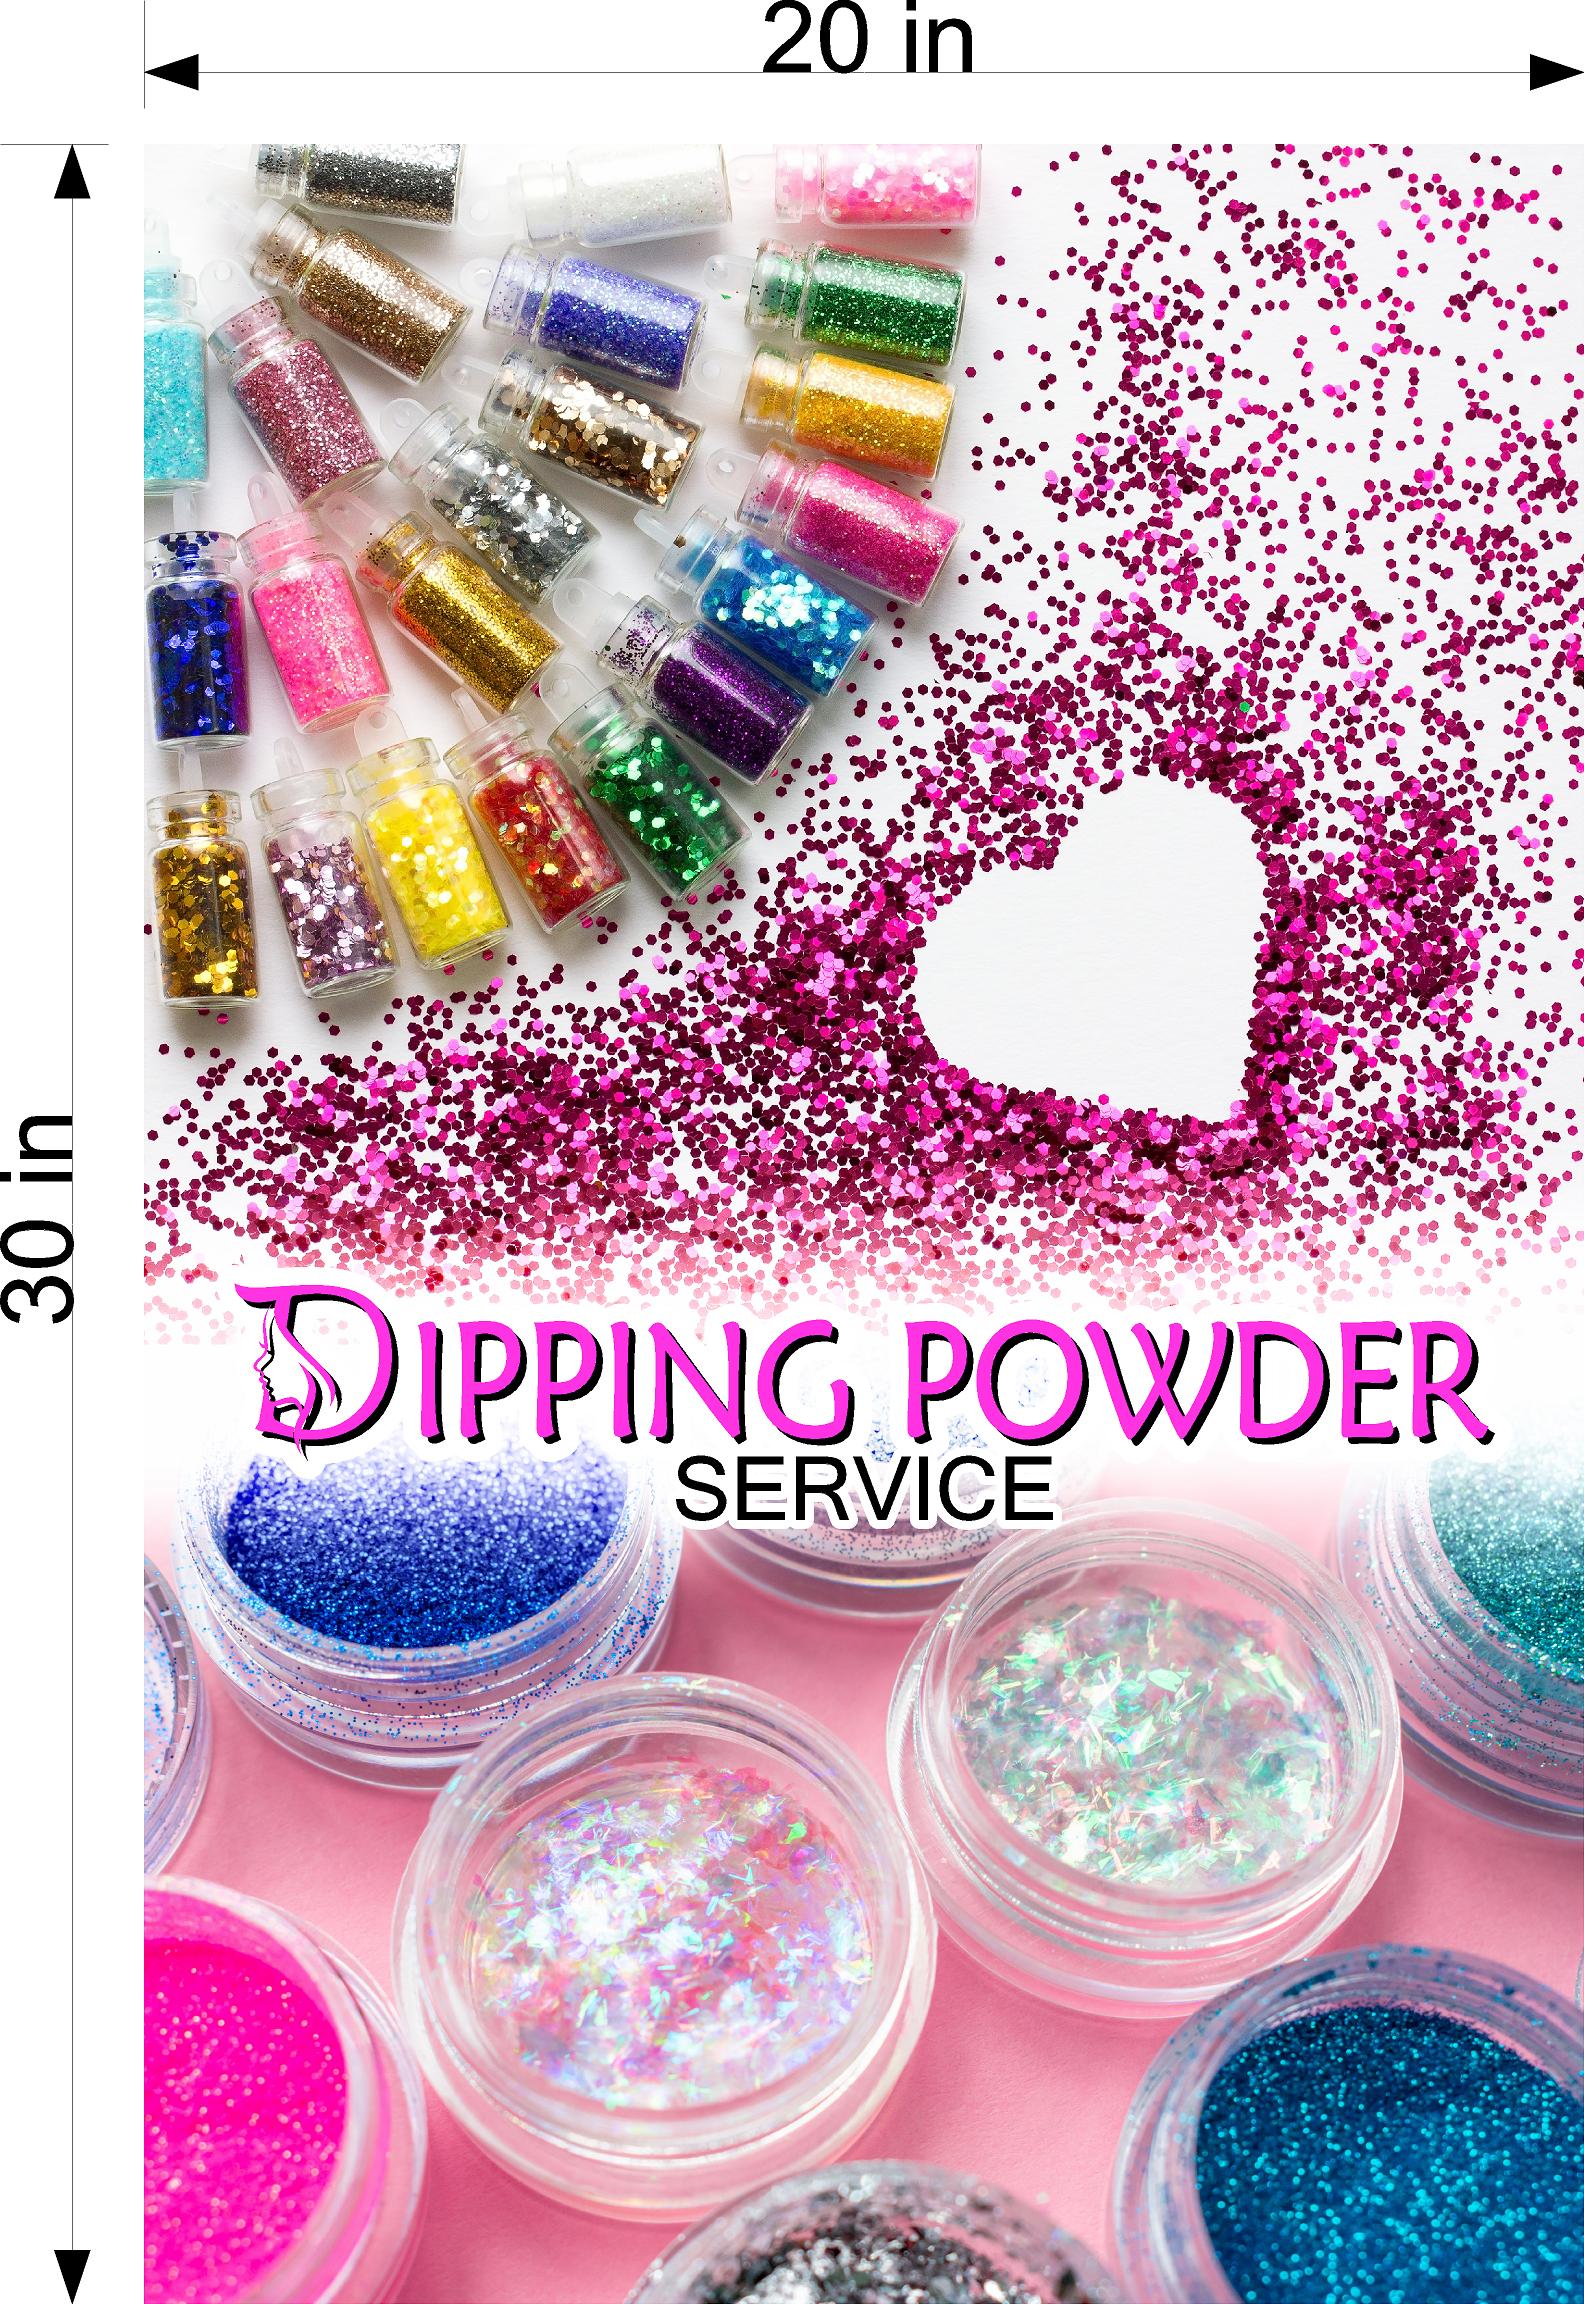 Dipping Powder 07 Wallpaper Poster Decal with Adhesive Backing Wall Sticker Decor Nail Salon Sign Vertical